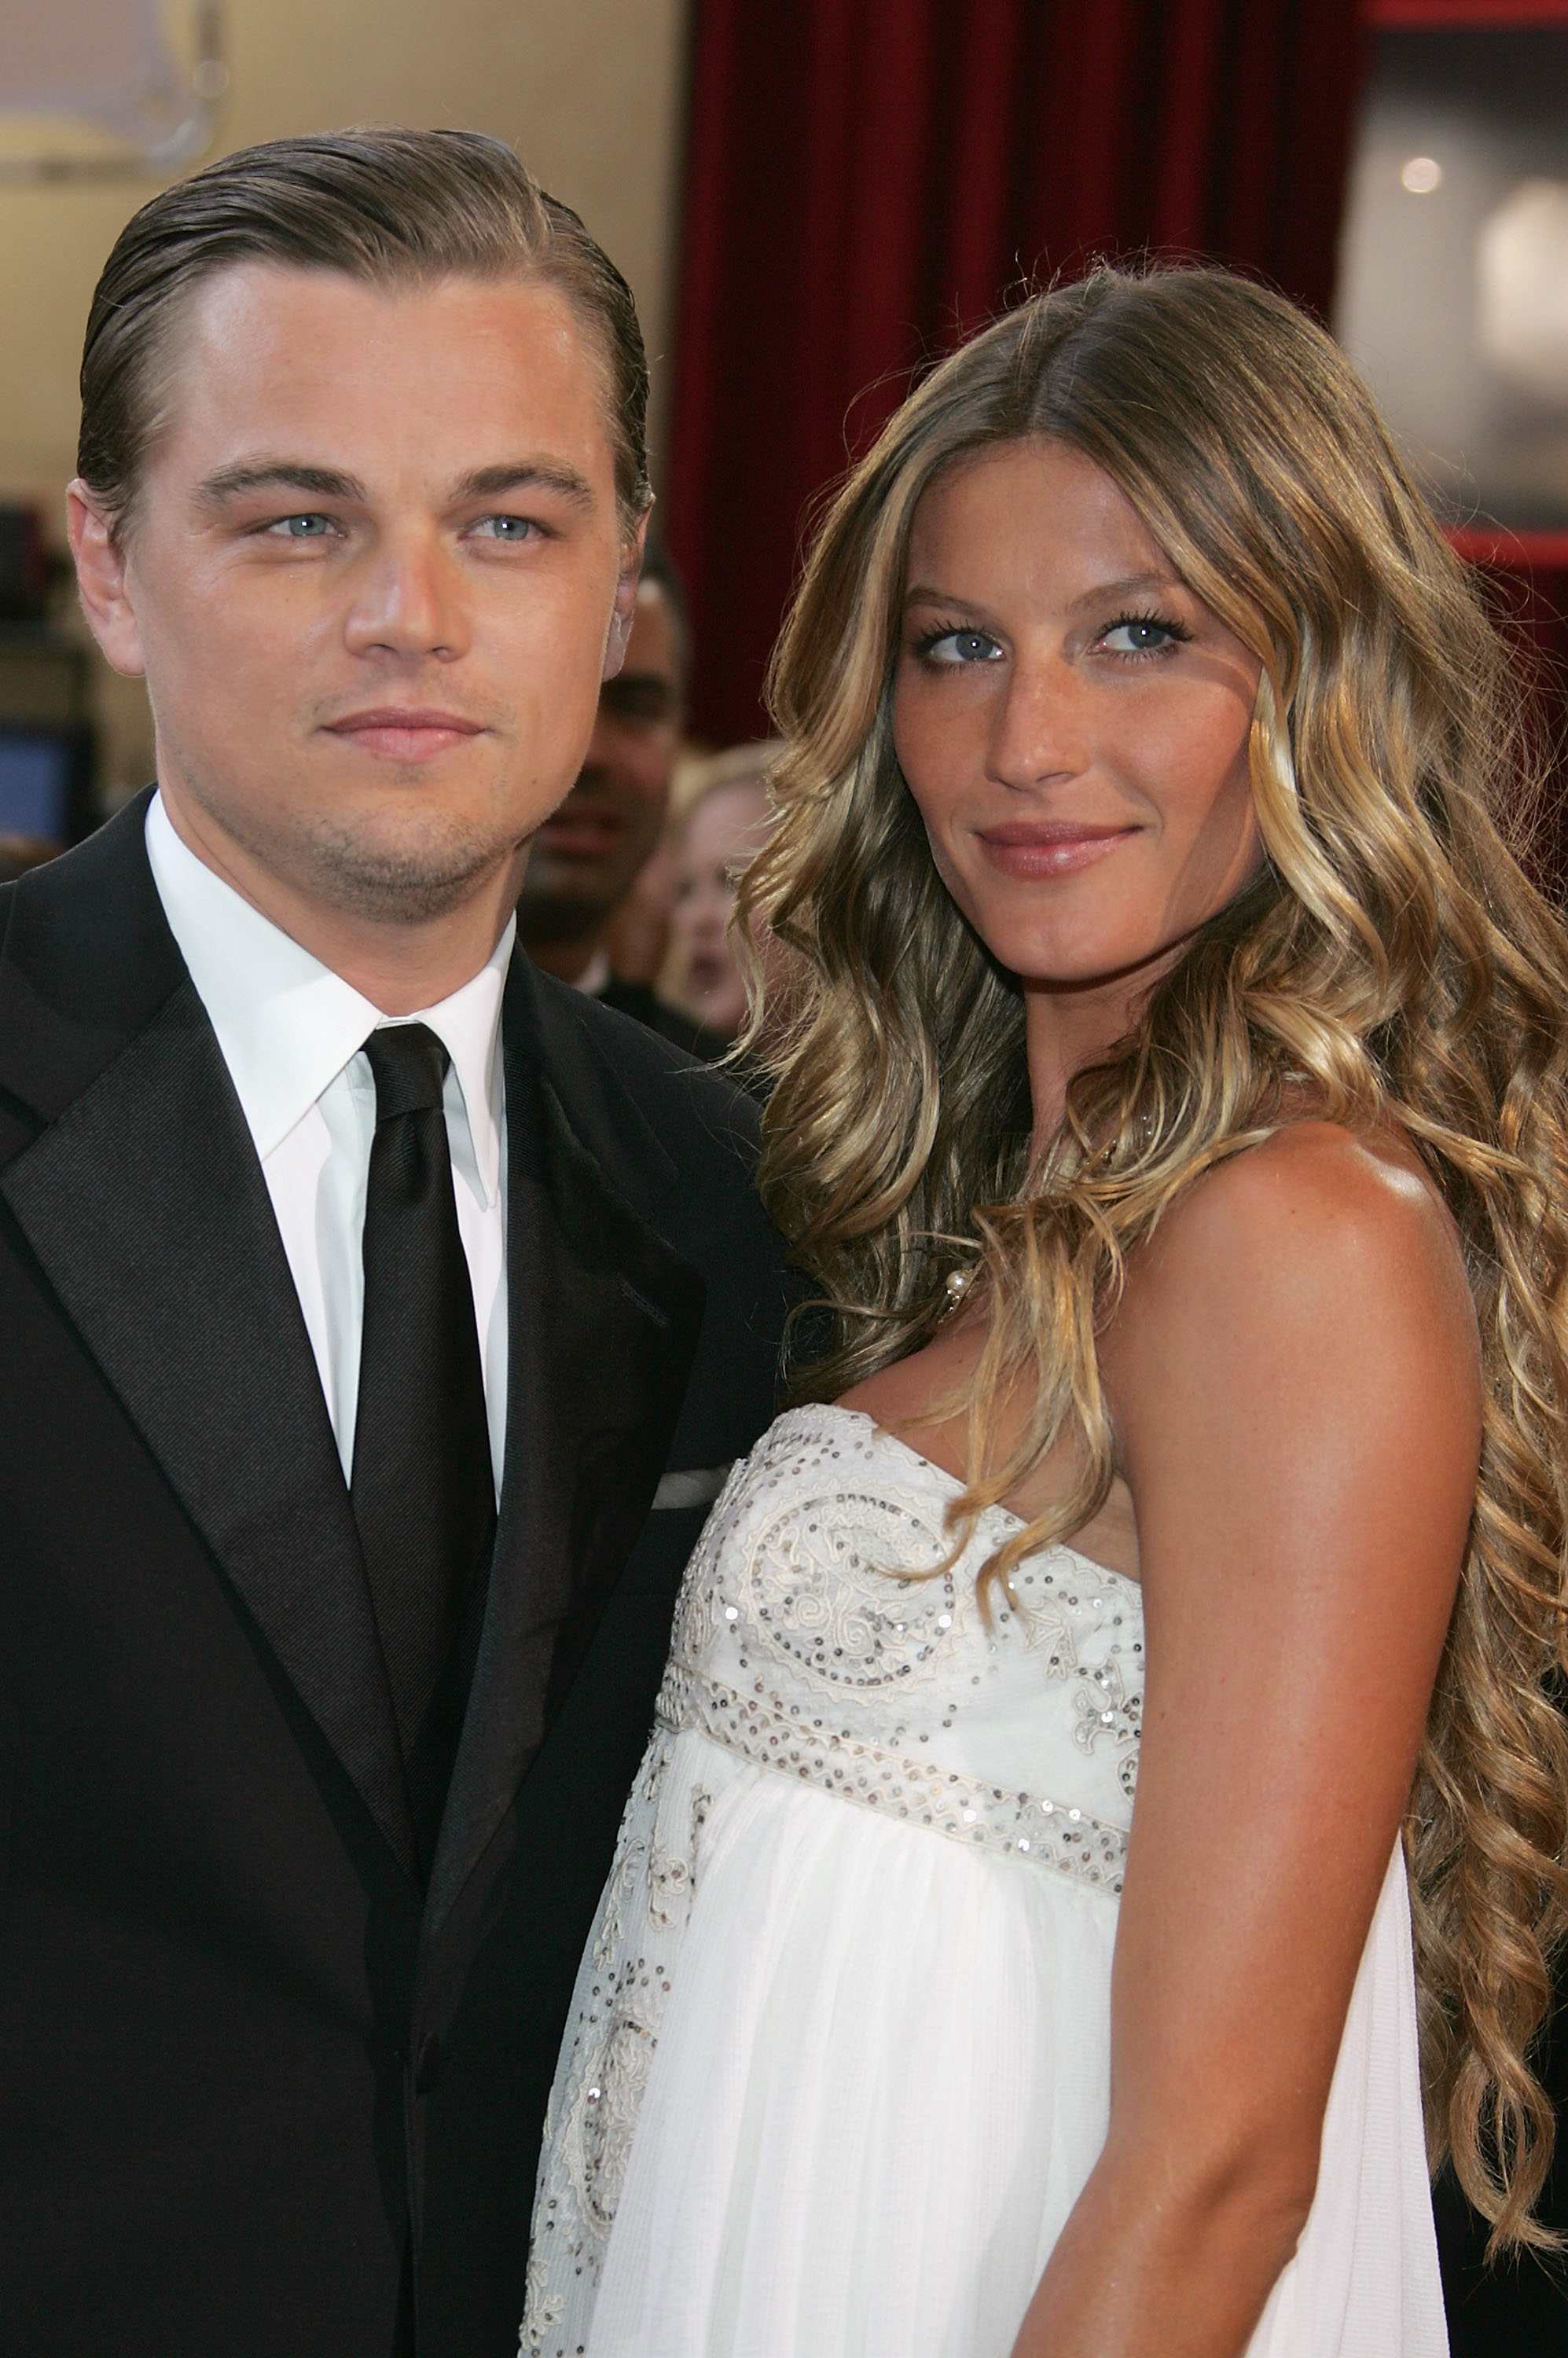 Gisele Bundchen just got very real about her relationship with Leonardo DiCaprio ...